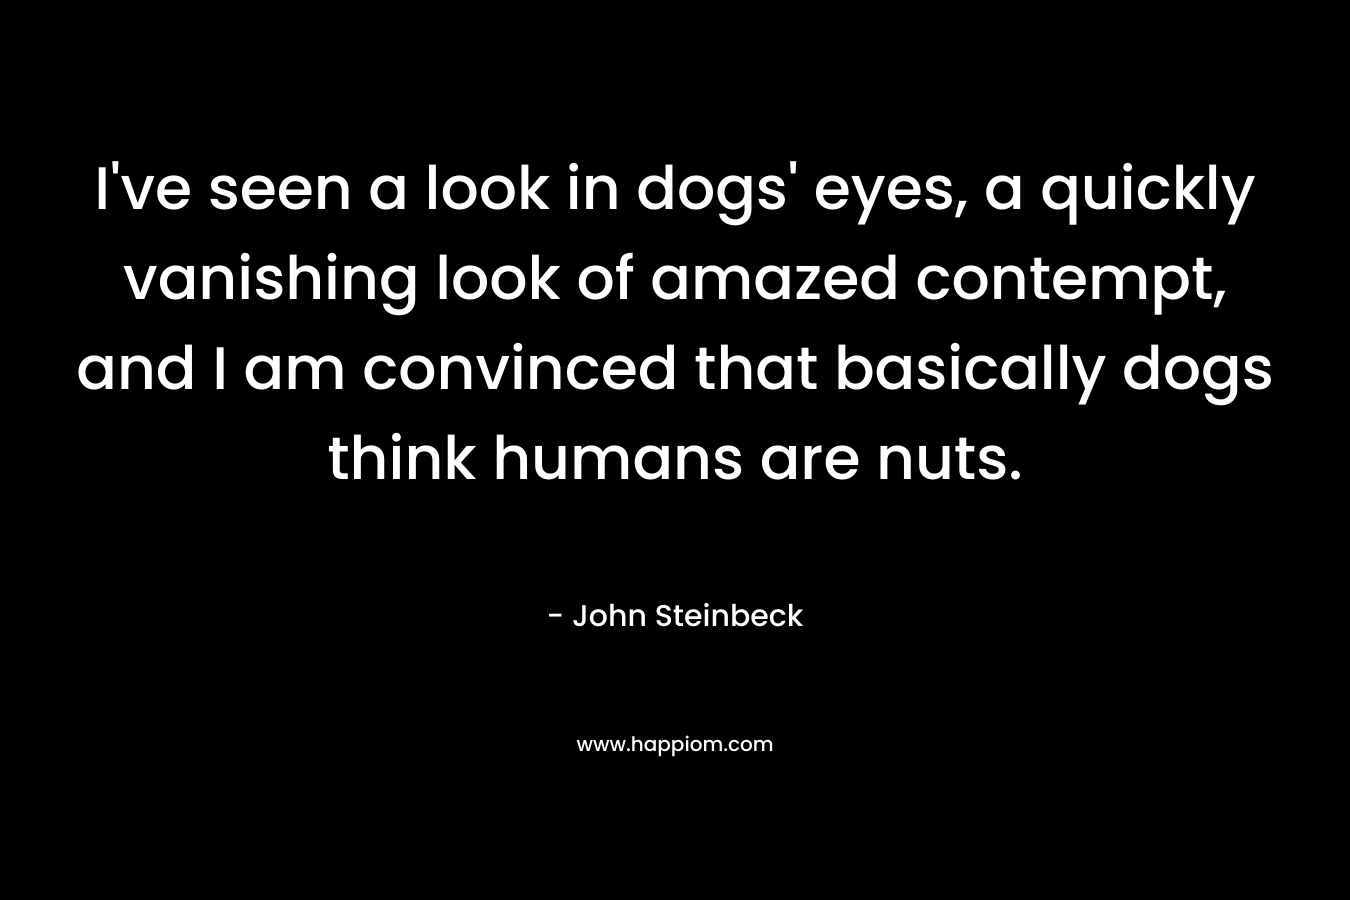 I’ve seen a look in dogs’ eyes, a quickly vanishing look of amazed contempt, and I am convinced that basically dogs think humans are nuts. – John Steinbeck